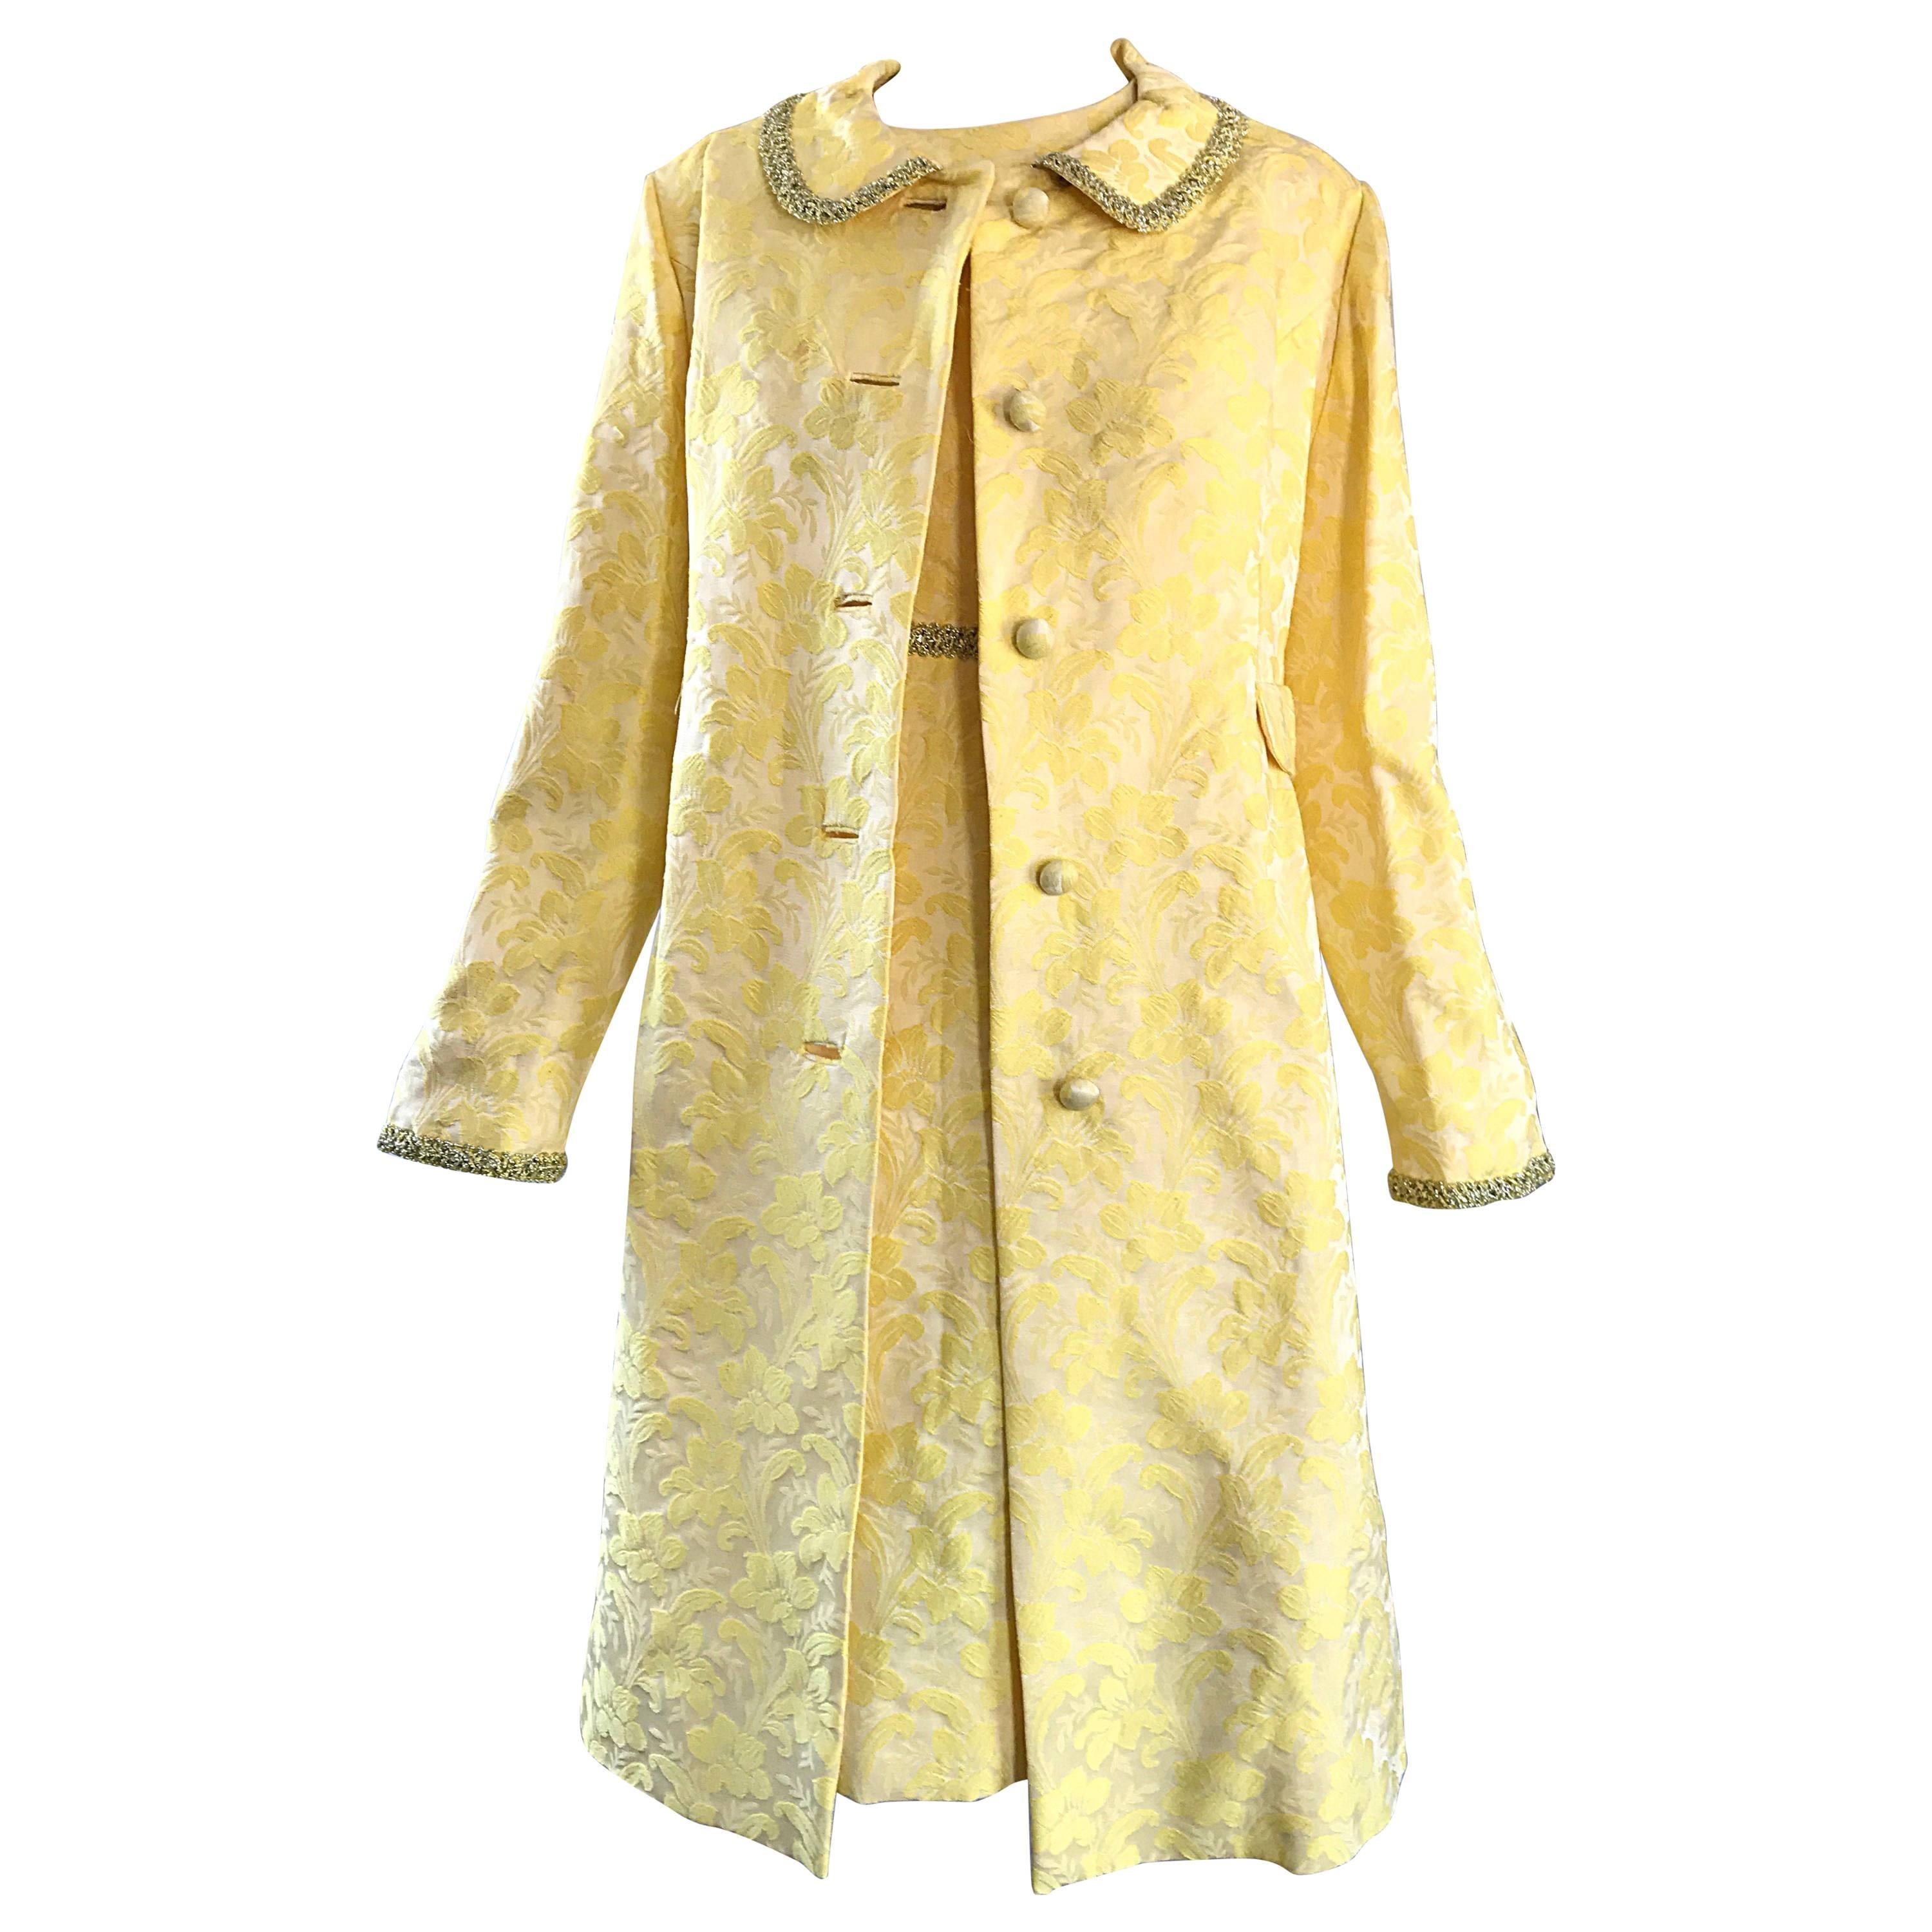 Chic 1960s Mademoiselle Canary Yellow Silk Borcade A - Line Dress & Jacket Suit For Sale